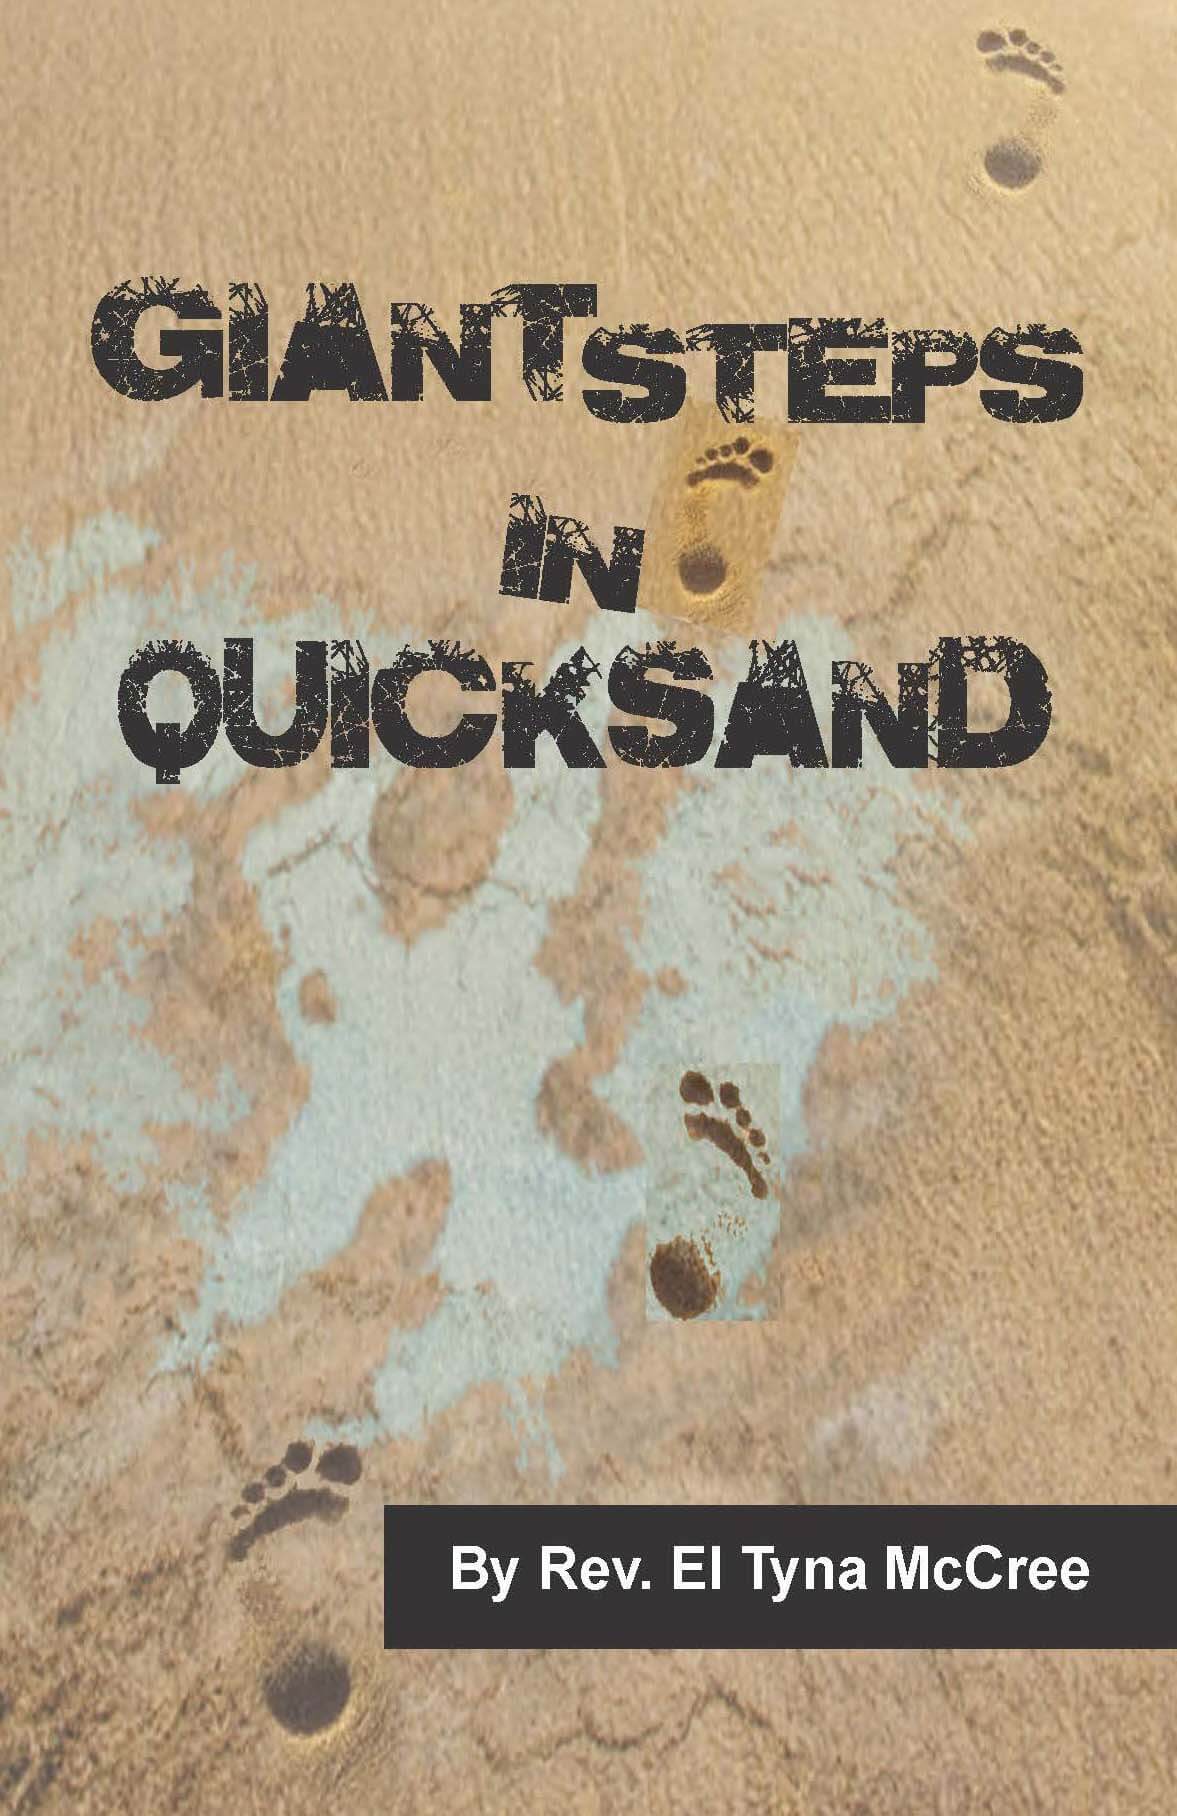 Book: Giant Steps In Quicksand by Reverend El Tyna McCree